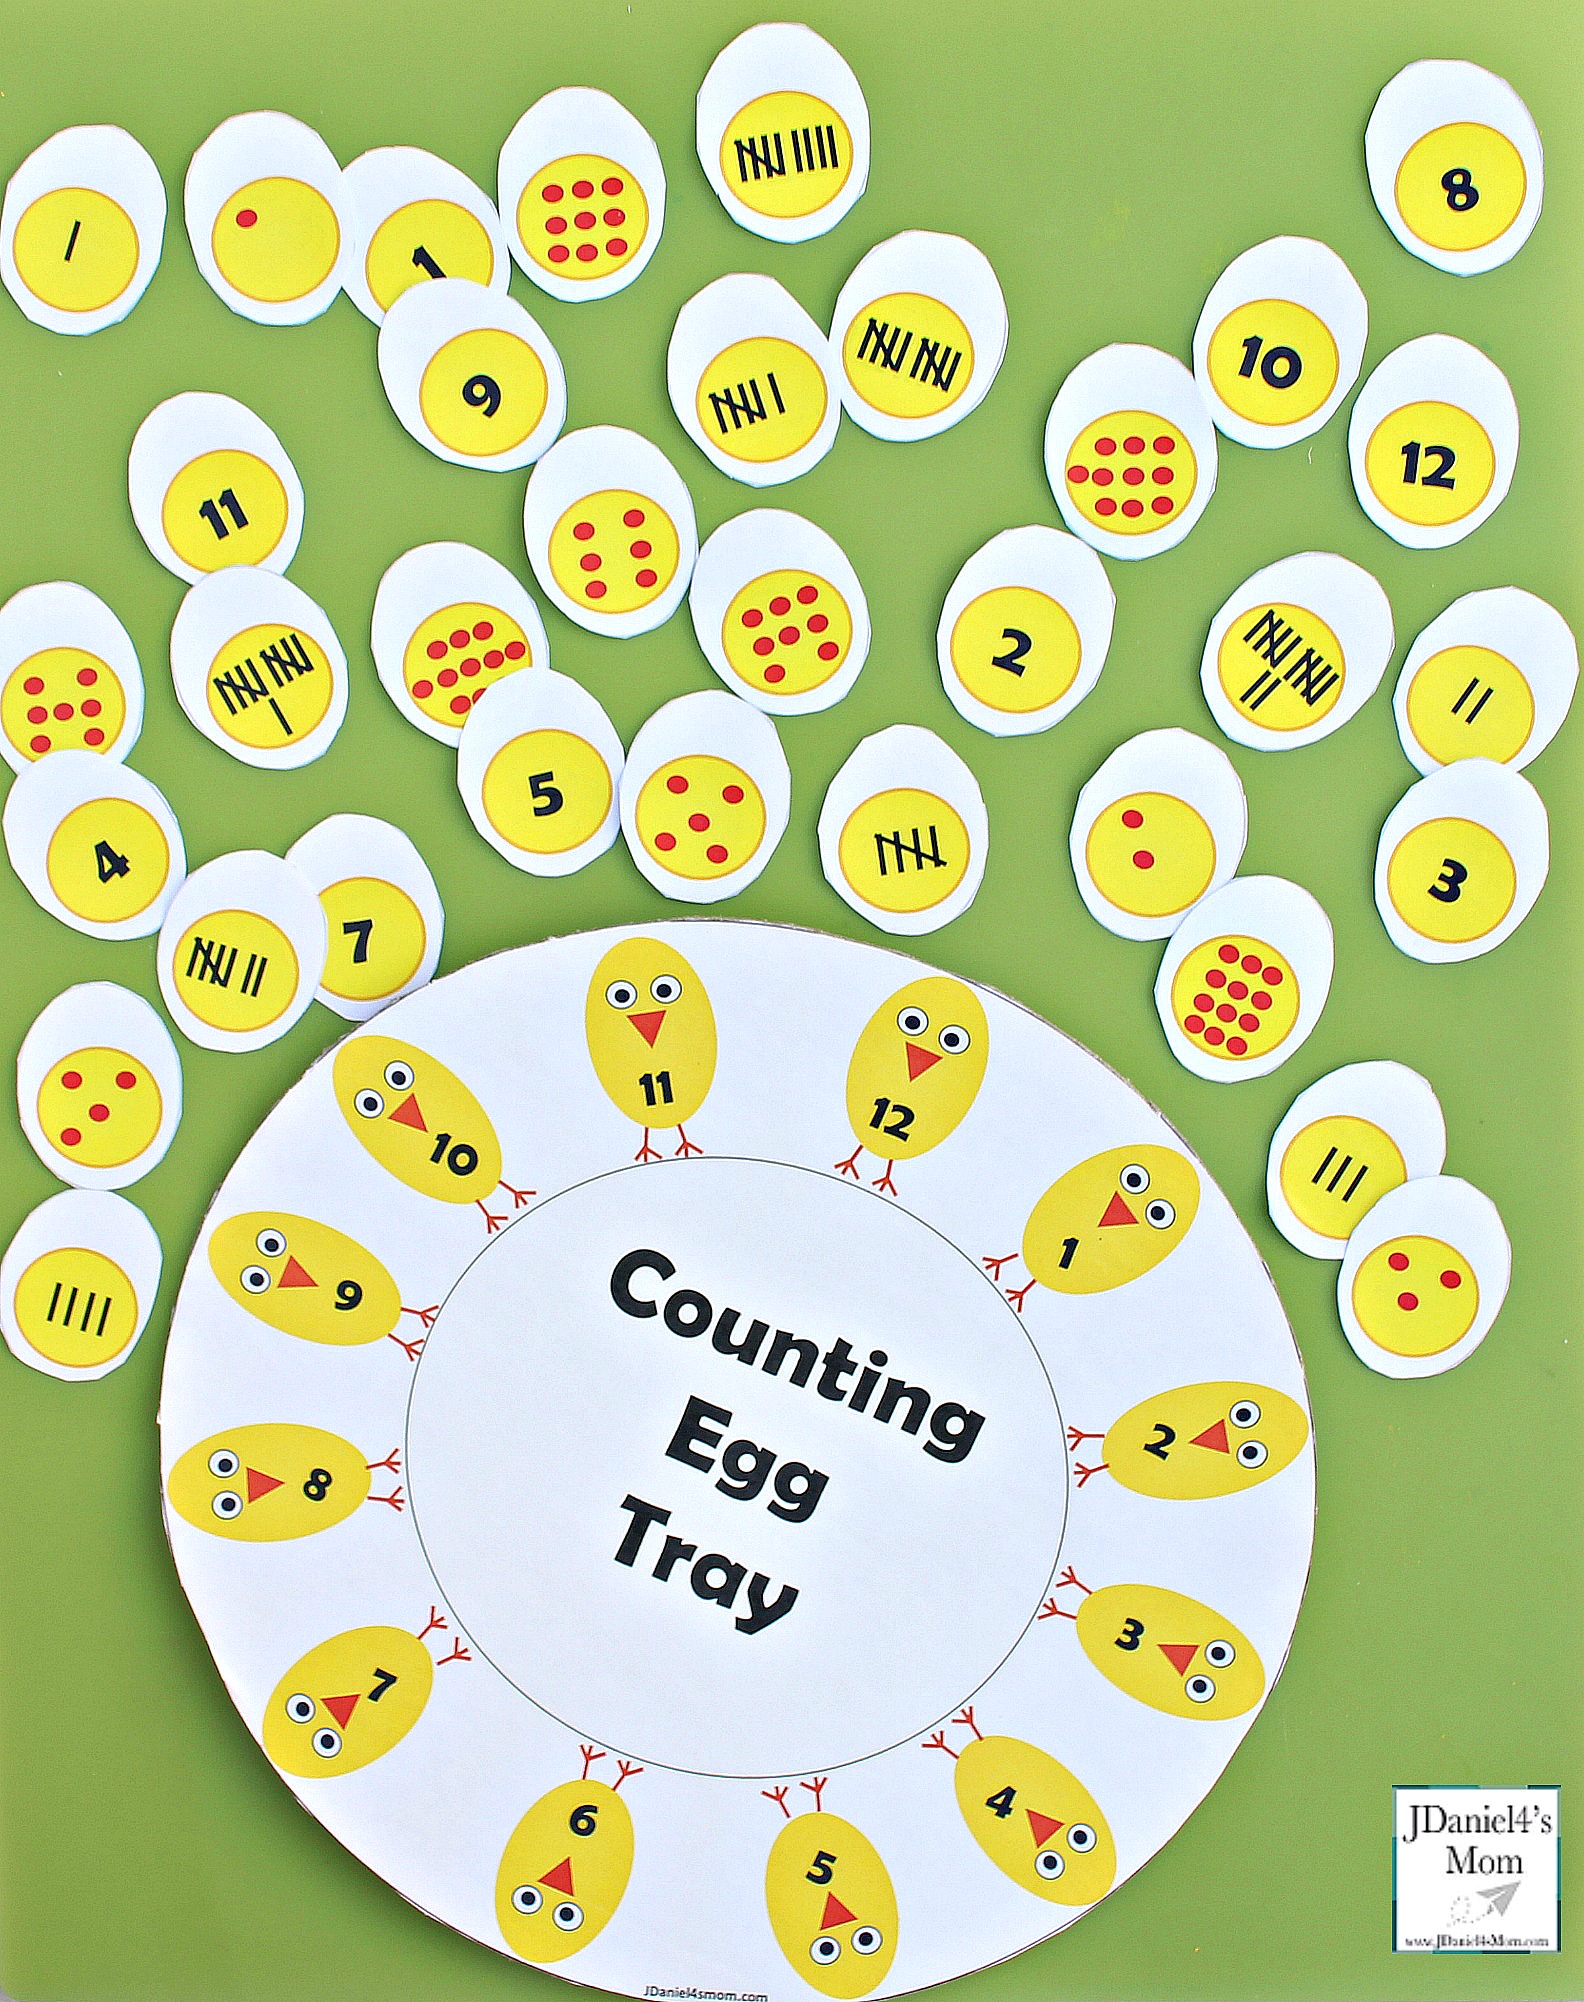 Number Recognition - Match the Chicken to the Egg Printables : This activity features a numbered deviled egg tray and three sets of number matching eggs. The first has tally marks, the second has numbers and the third has paprika colored dots. This is what the full set looks like.